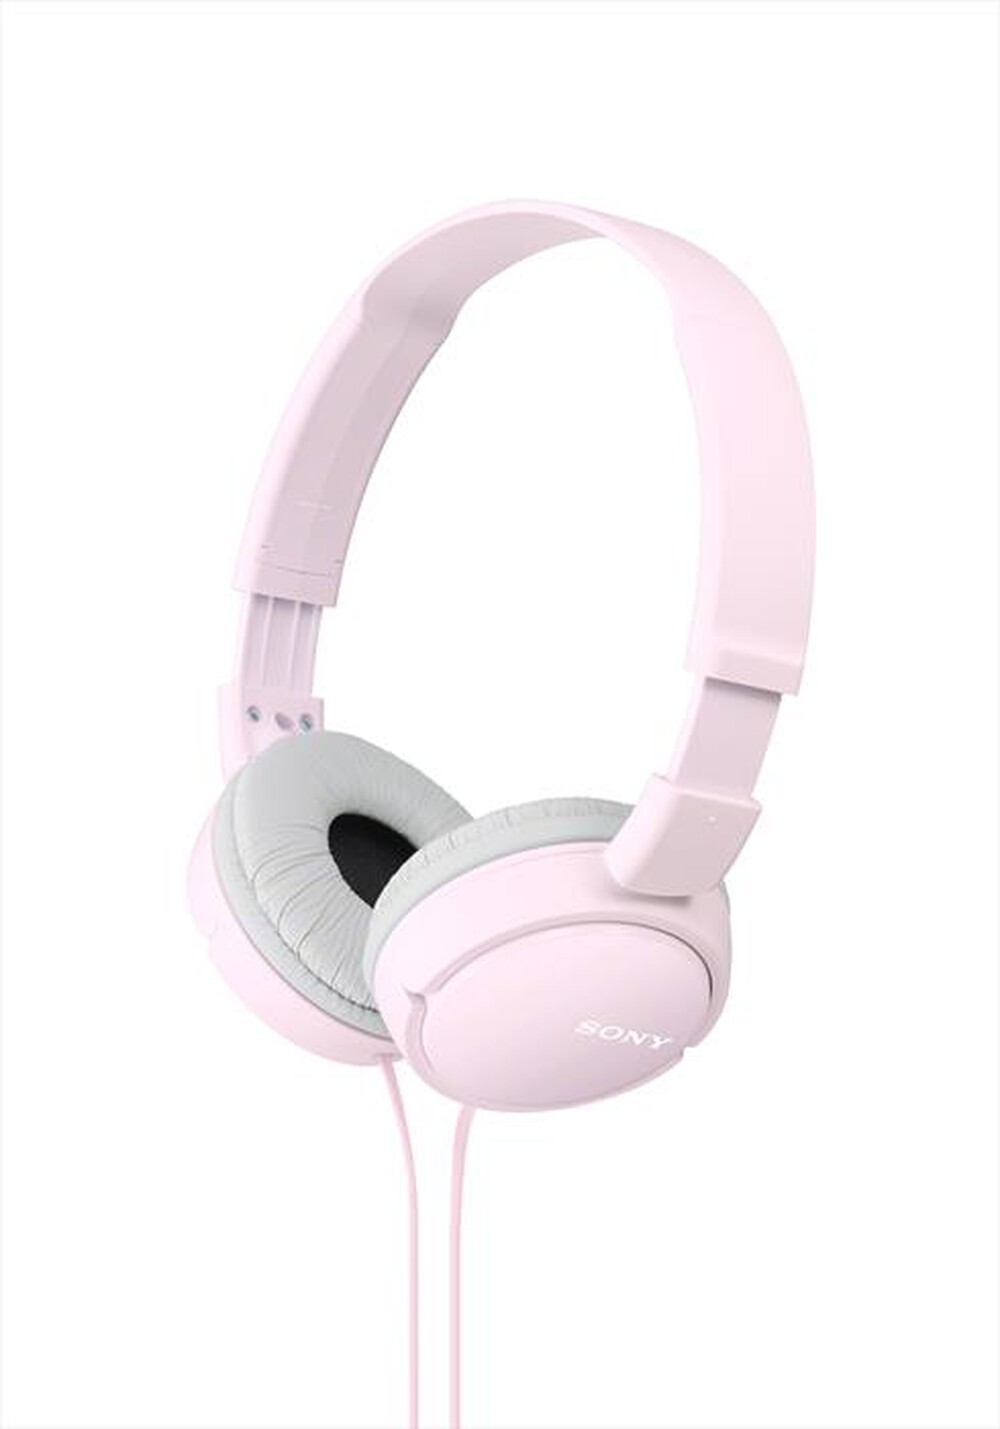 "SONY - MDRZX110P.AE - ROSA"